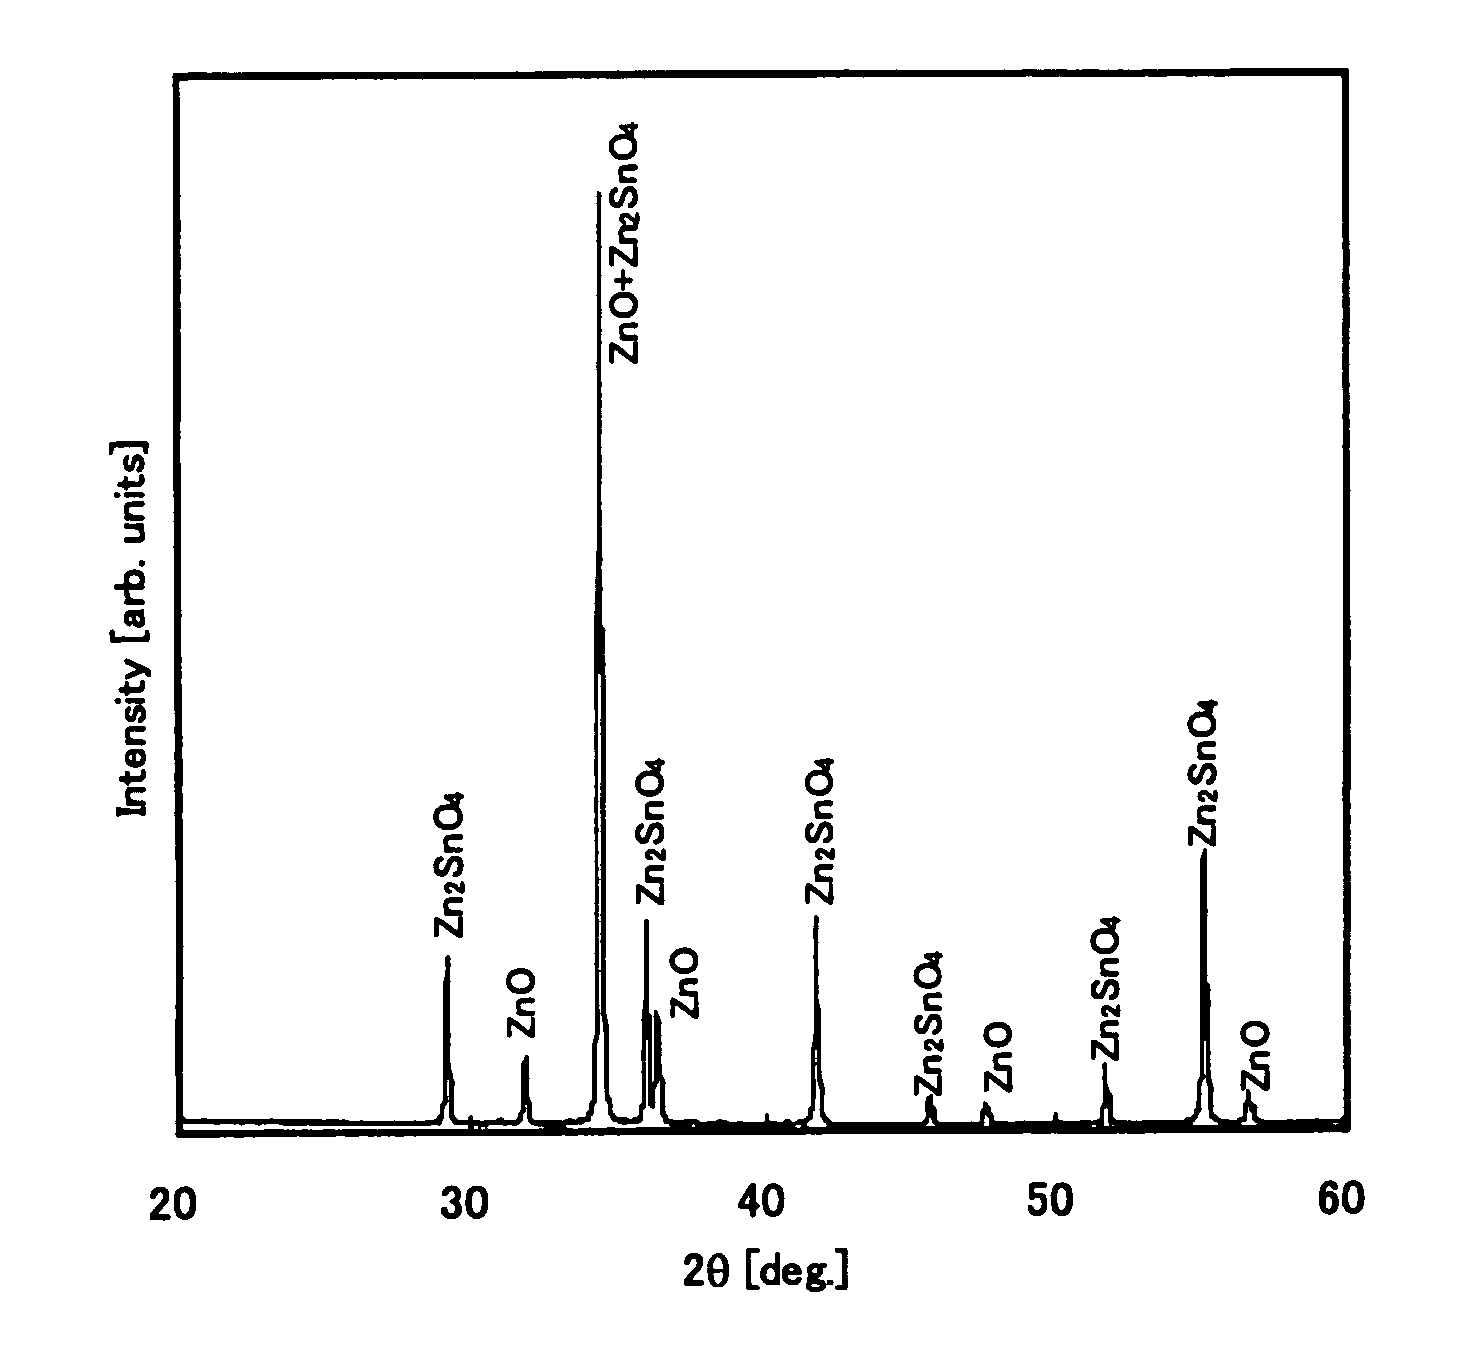 Oxide sintered body comprising zinc oxide phase and zinc stannate compound phase